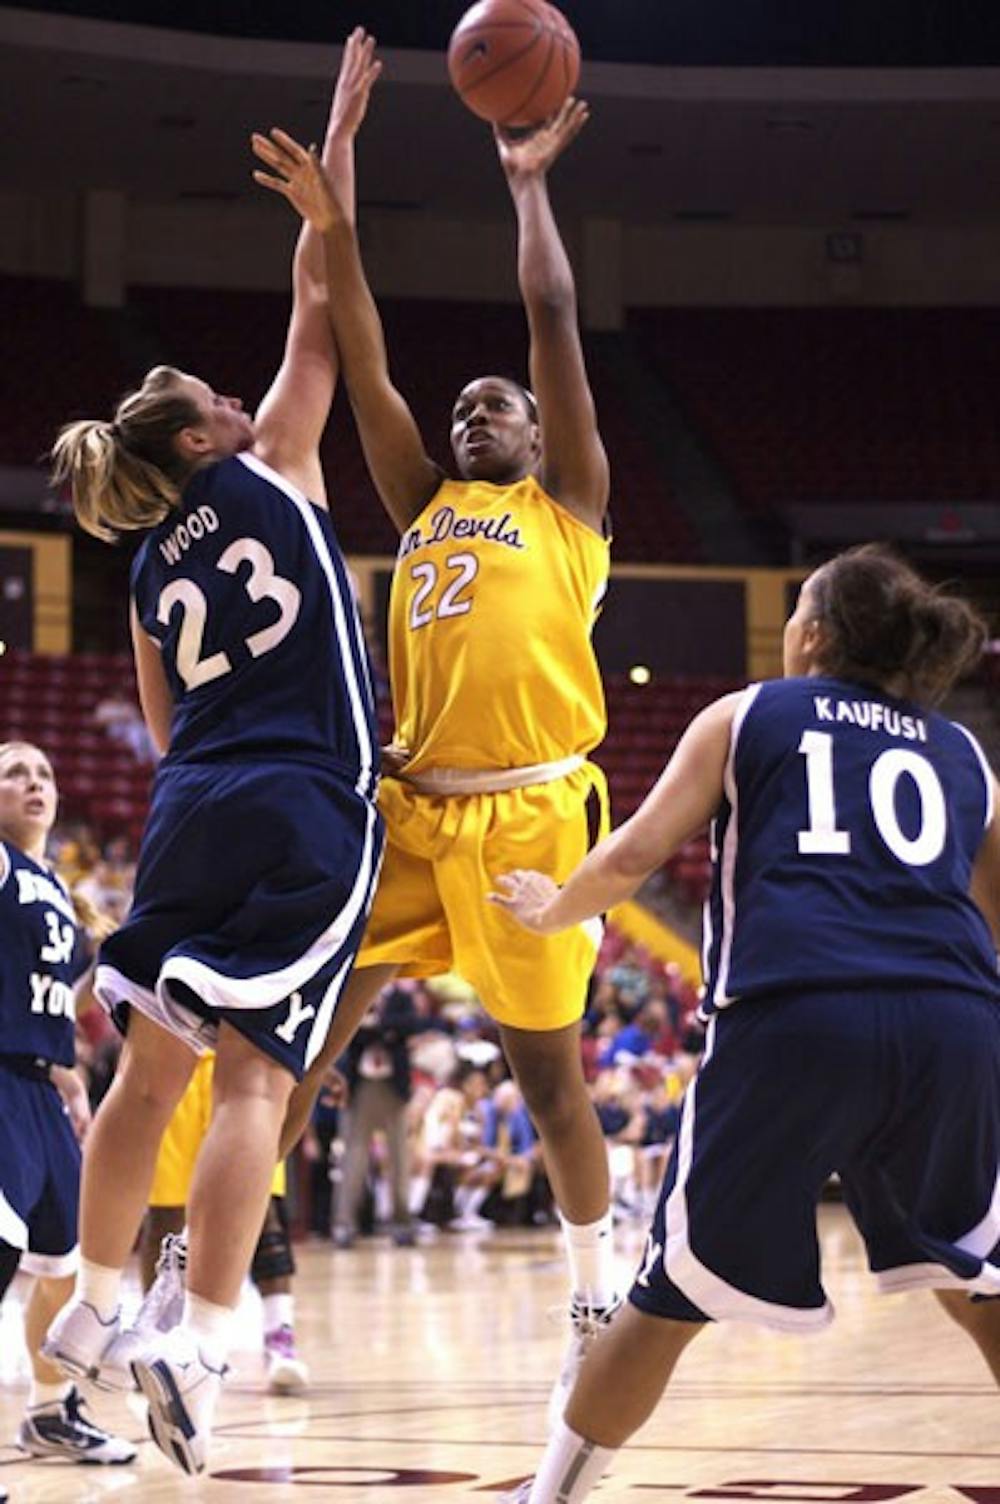 END OF THE ROAD: Freshman forward Janae Fulcher attempts a shot in ASU's season-ending 61-53 loss to BYU on Tuesday. (Photo by Scott Stuk)